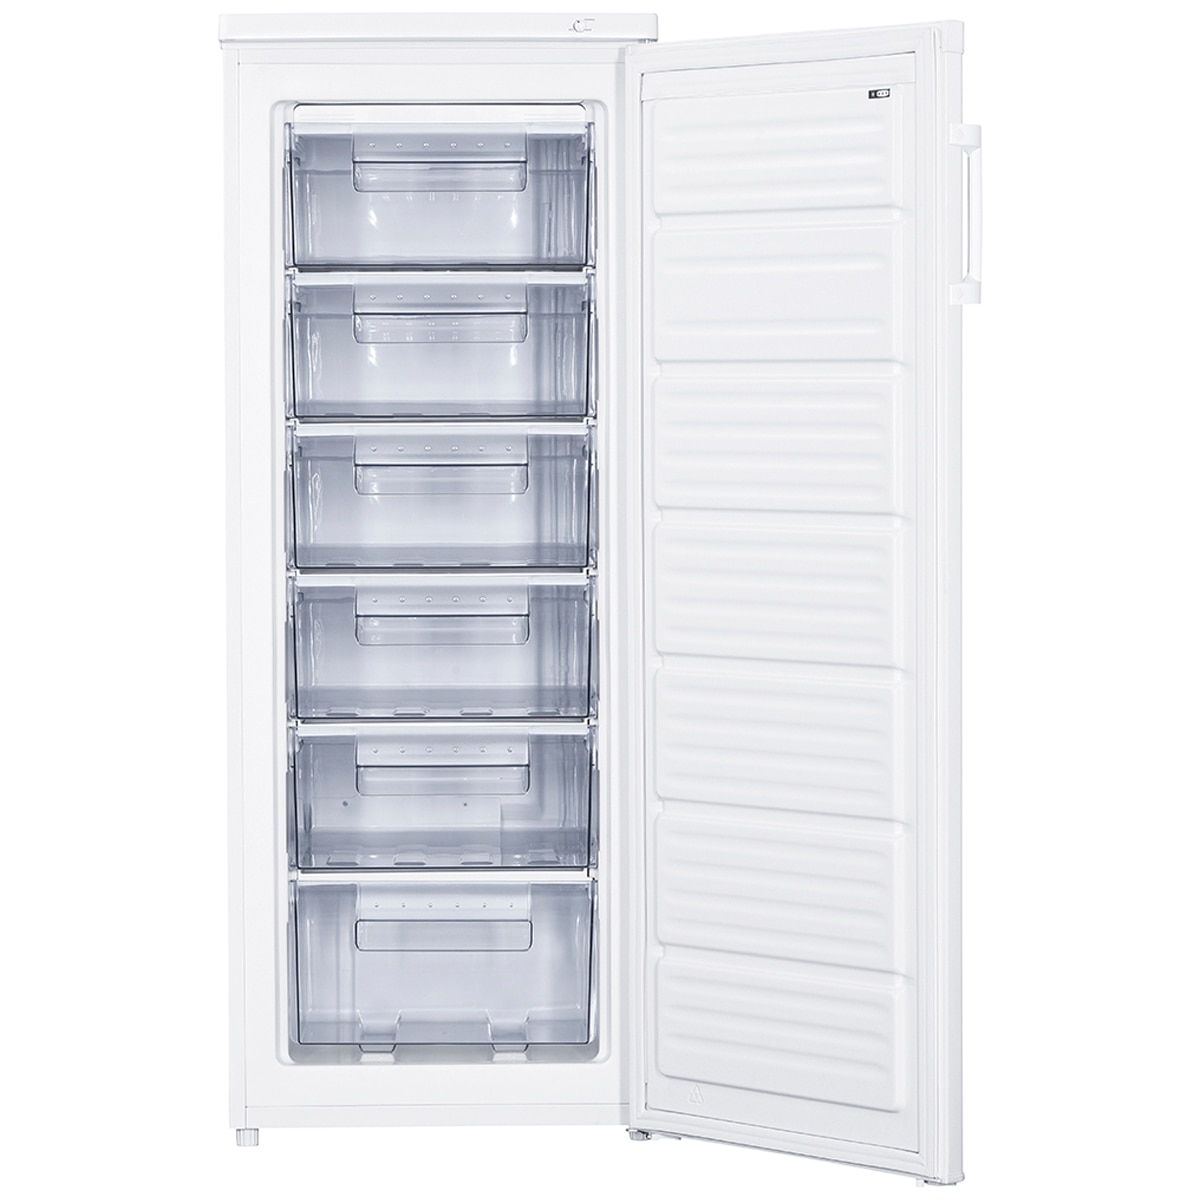 Upright Freezer Costco With Drawers - How To Blog